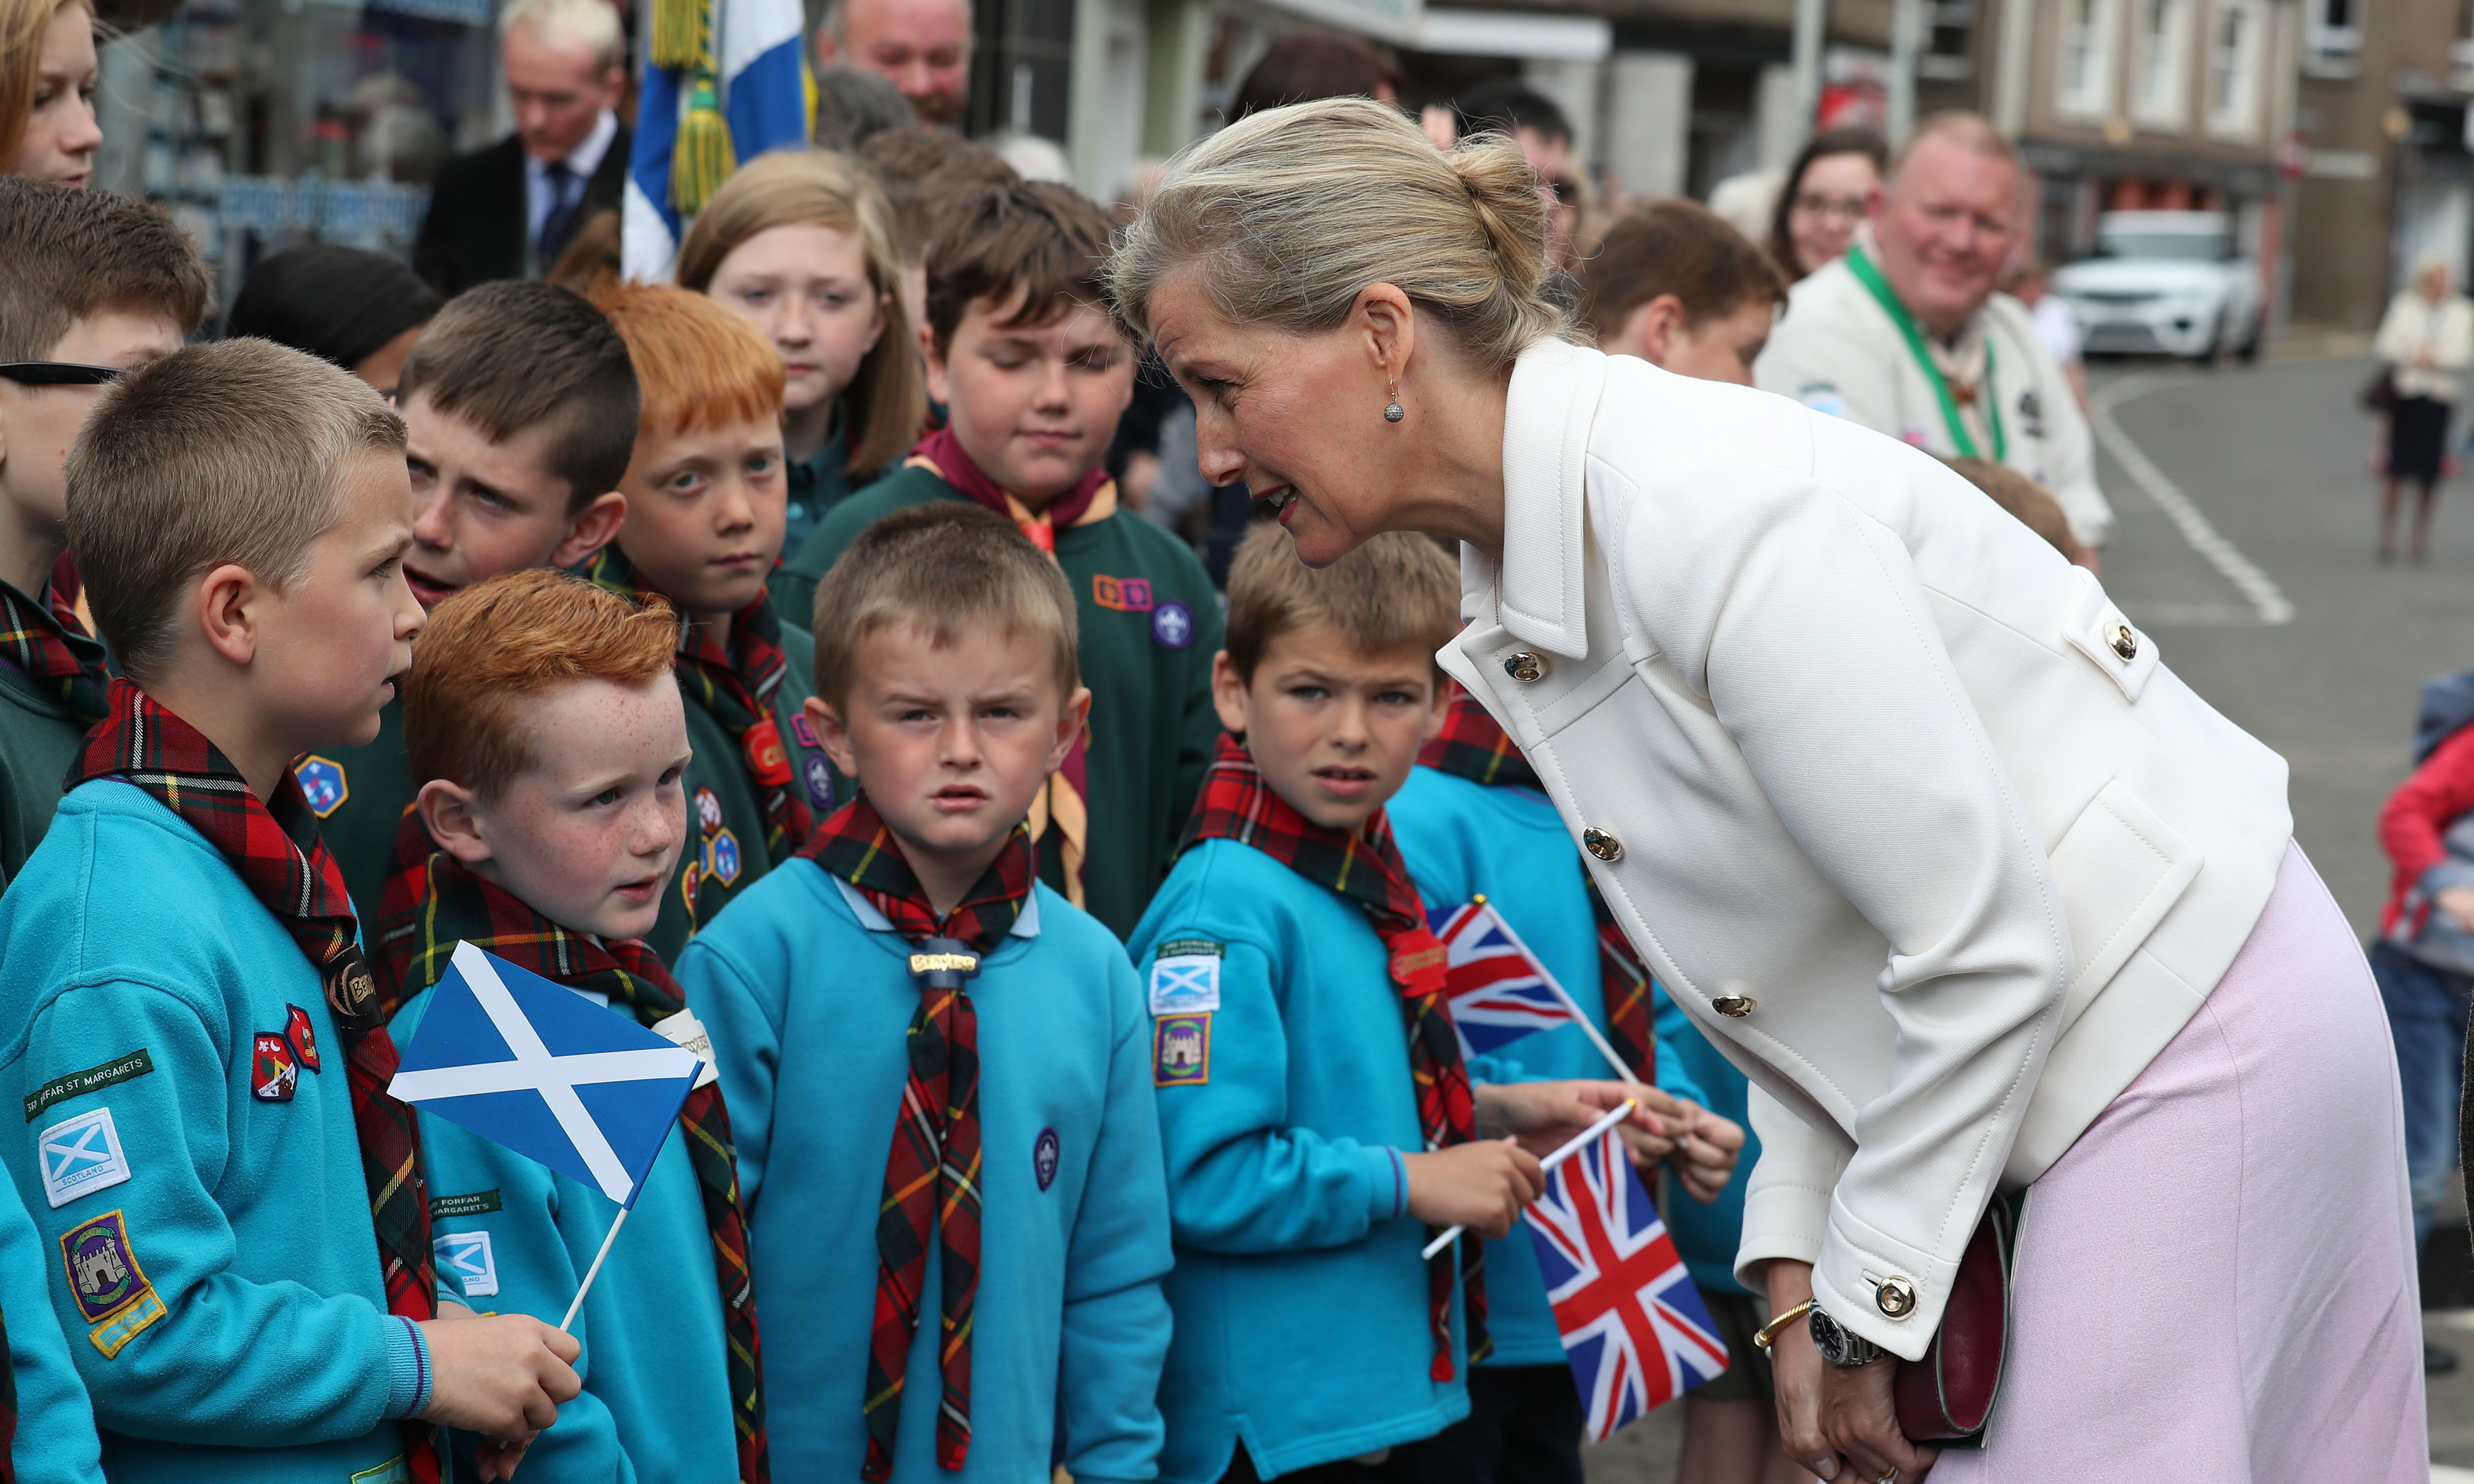 The Countess of Forfar chats with locals on Castle Street in Forfar.